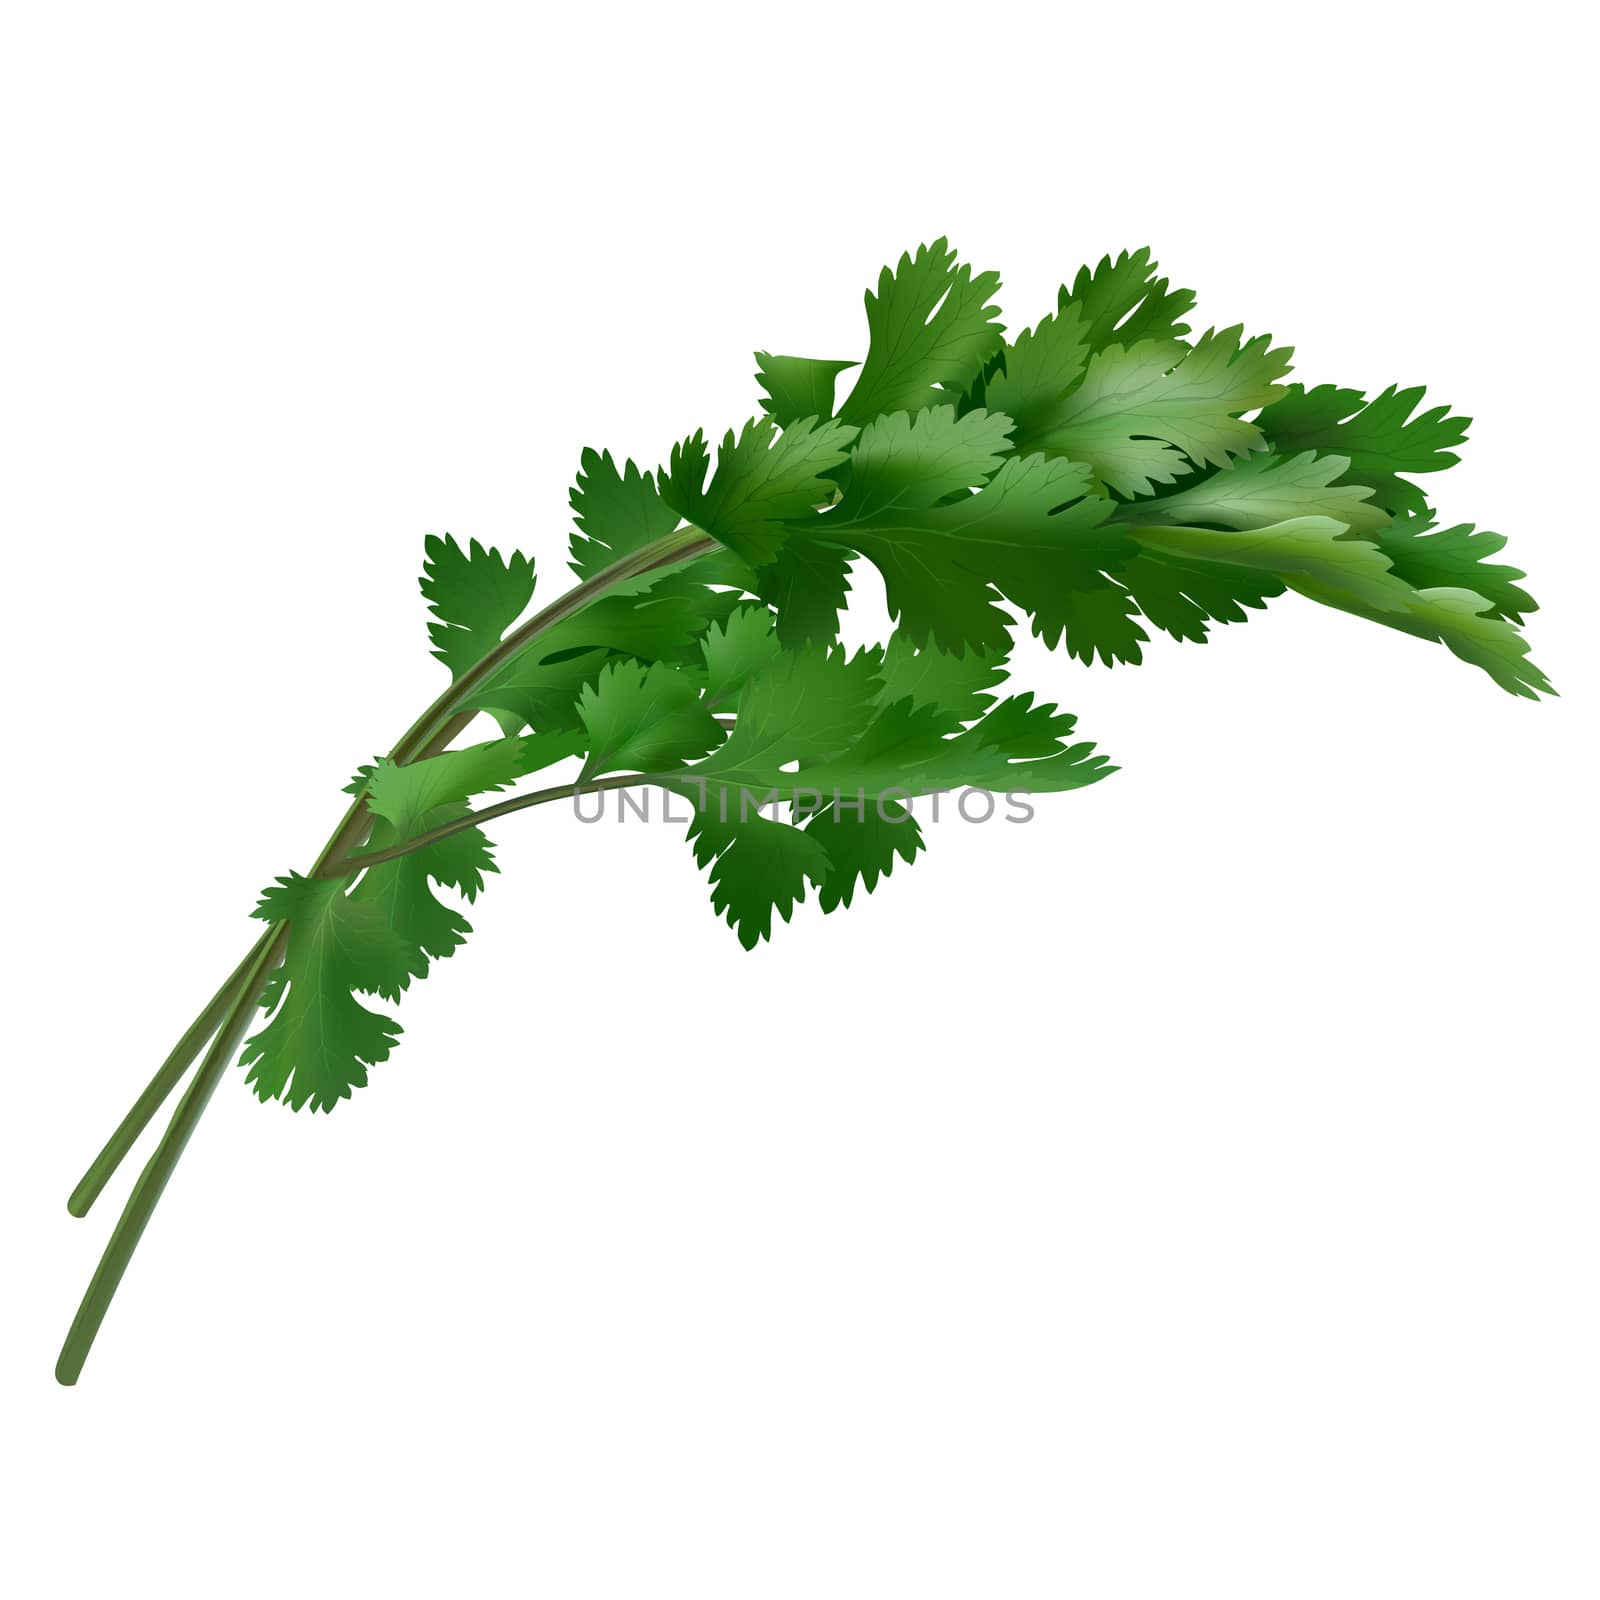 Cilantro on white background by ConceptCafe